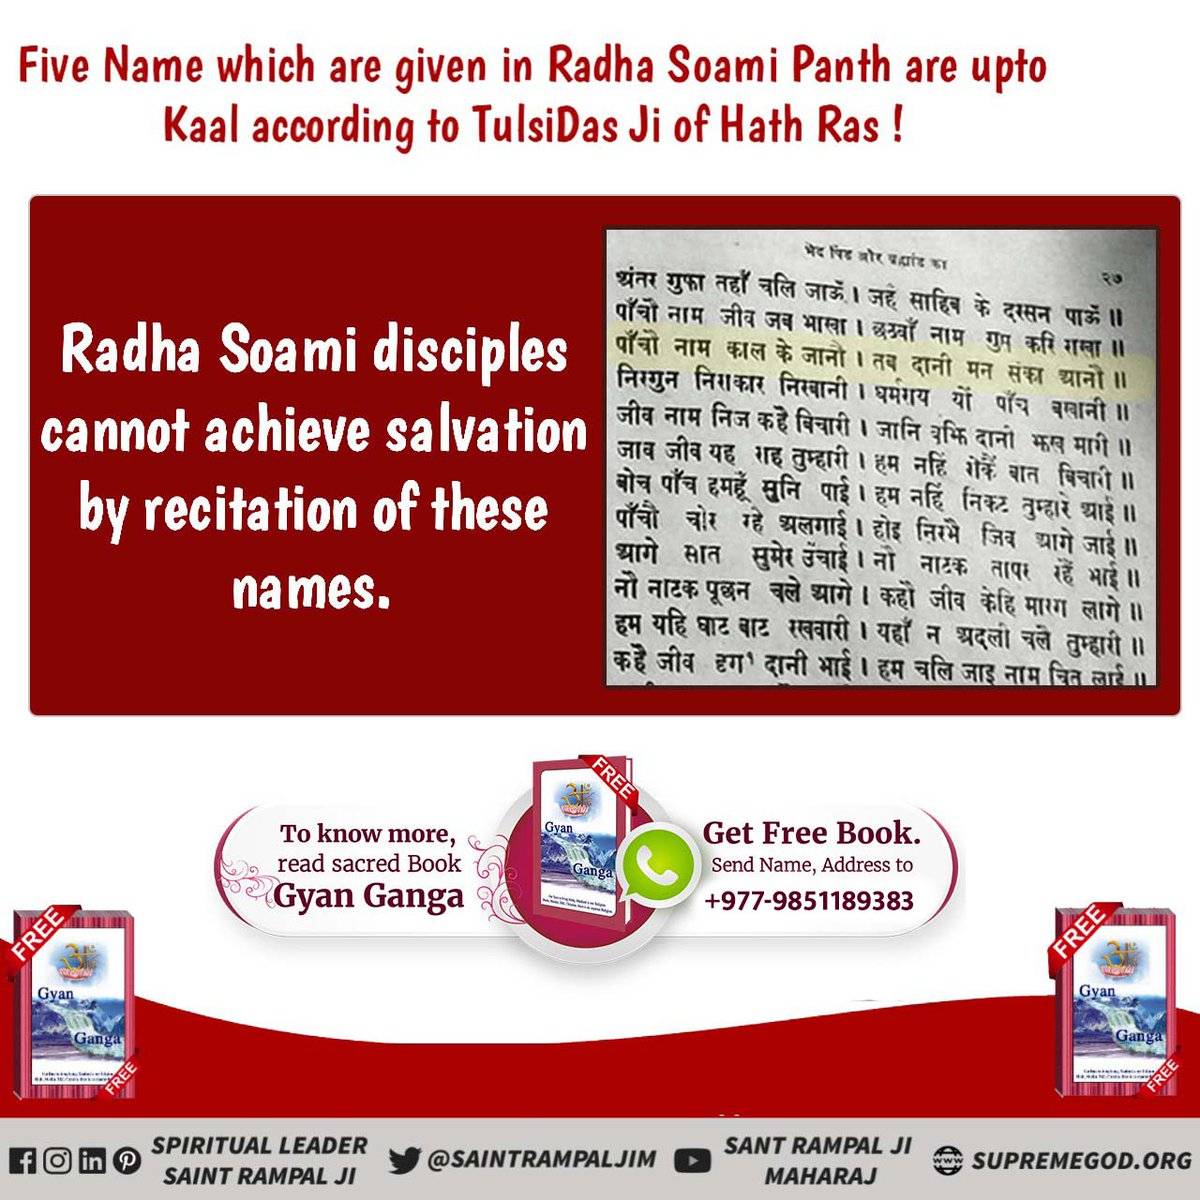 #राधास्वामी_पन्थको_सत्यता Dear readers, don't let your precious human life go to waste. Recognize the truth and choose the path to salvation with Sant Rampal Ji Maharaj.